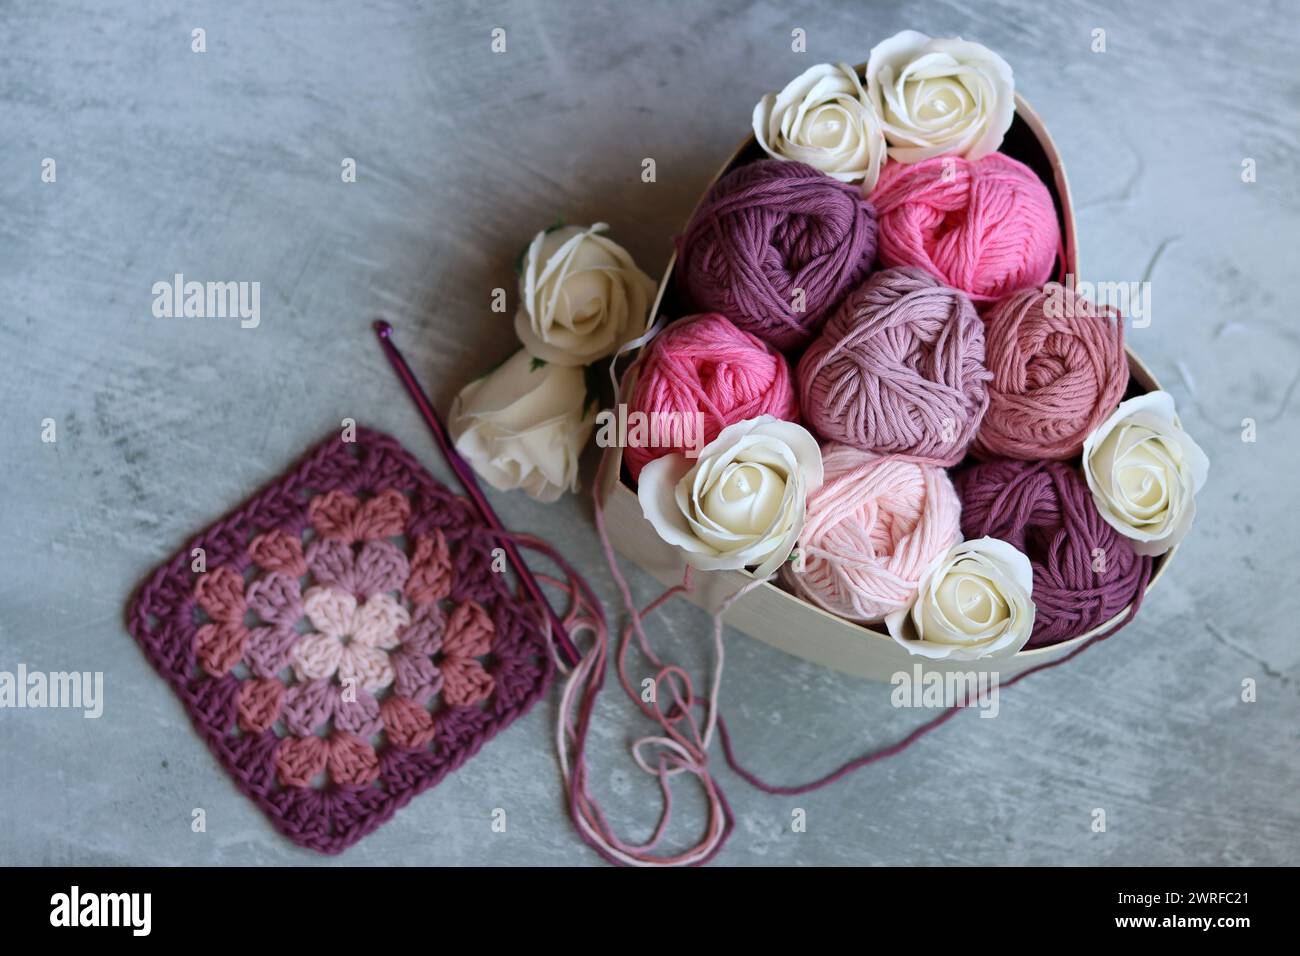 Heart-shaped box with white roses and cotton yarn on a gray background. Cotton yarn texture close up photo. Art and craft concept. Stock Photo